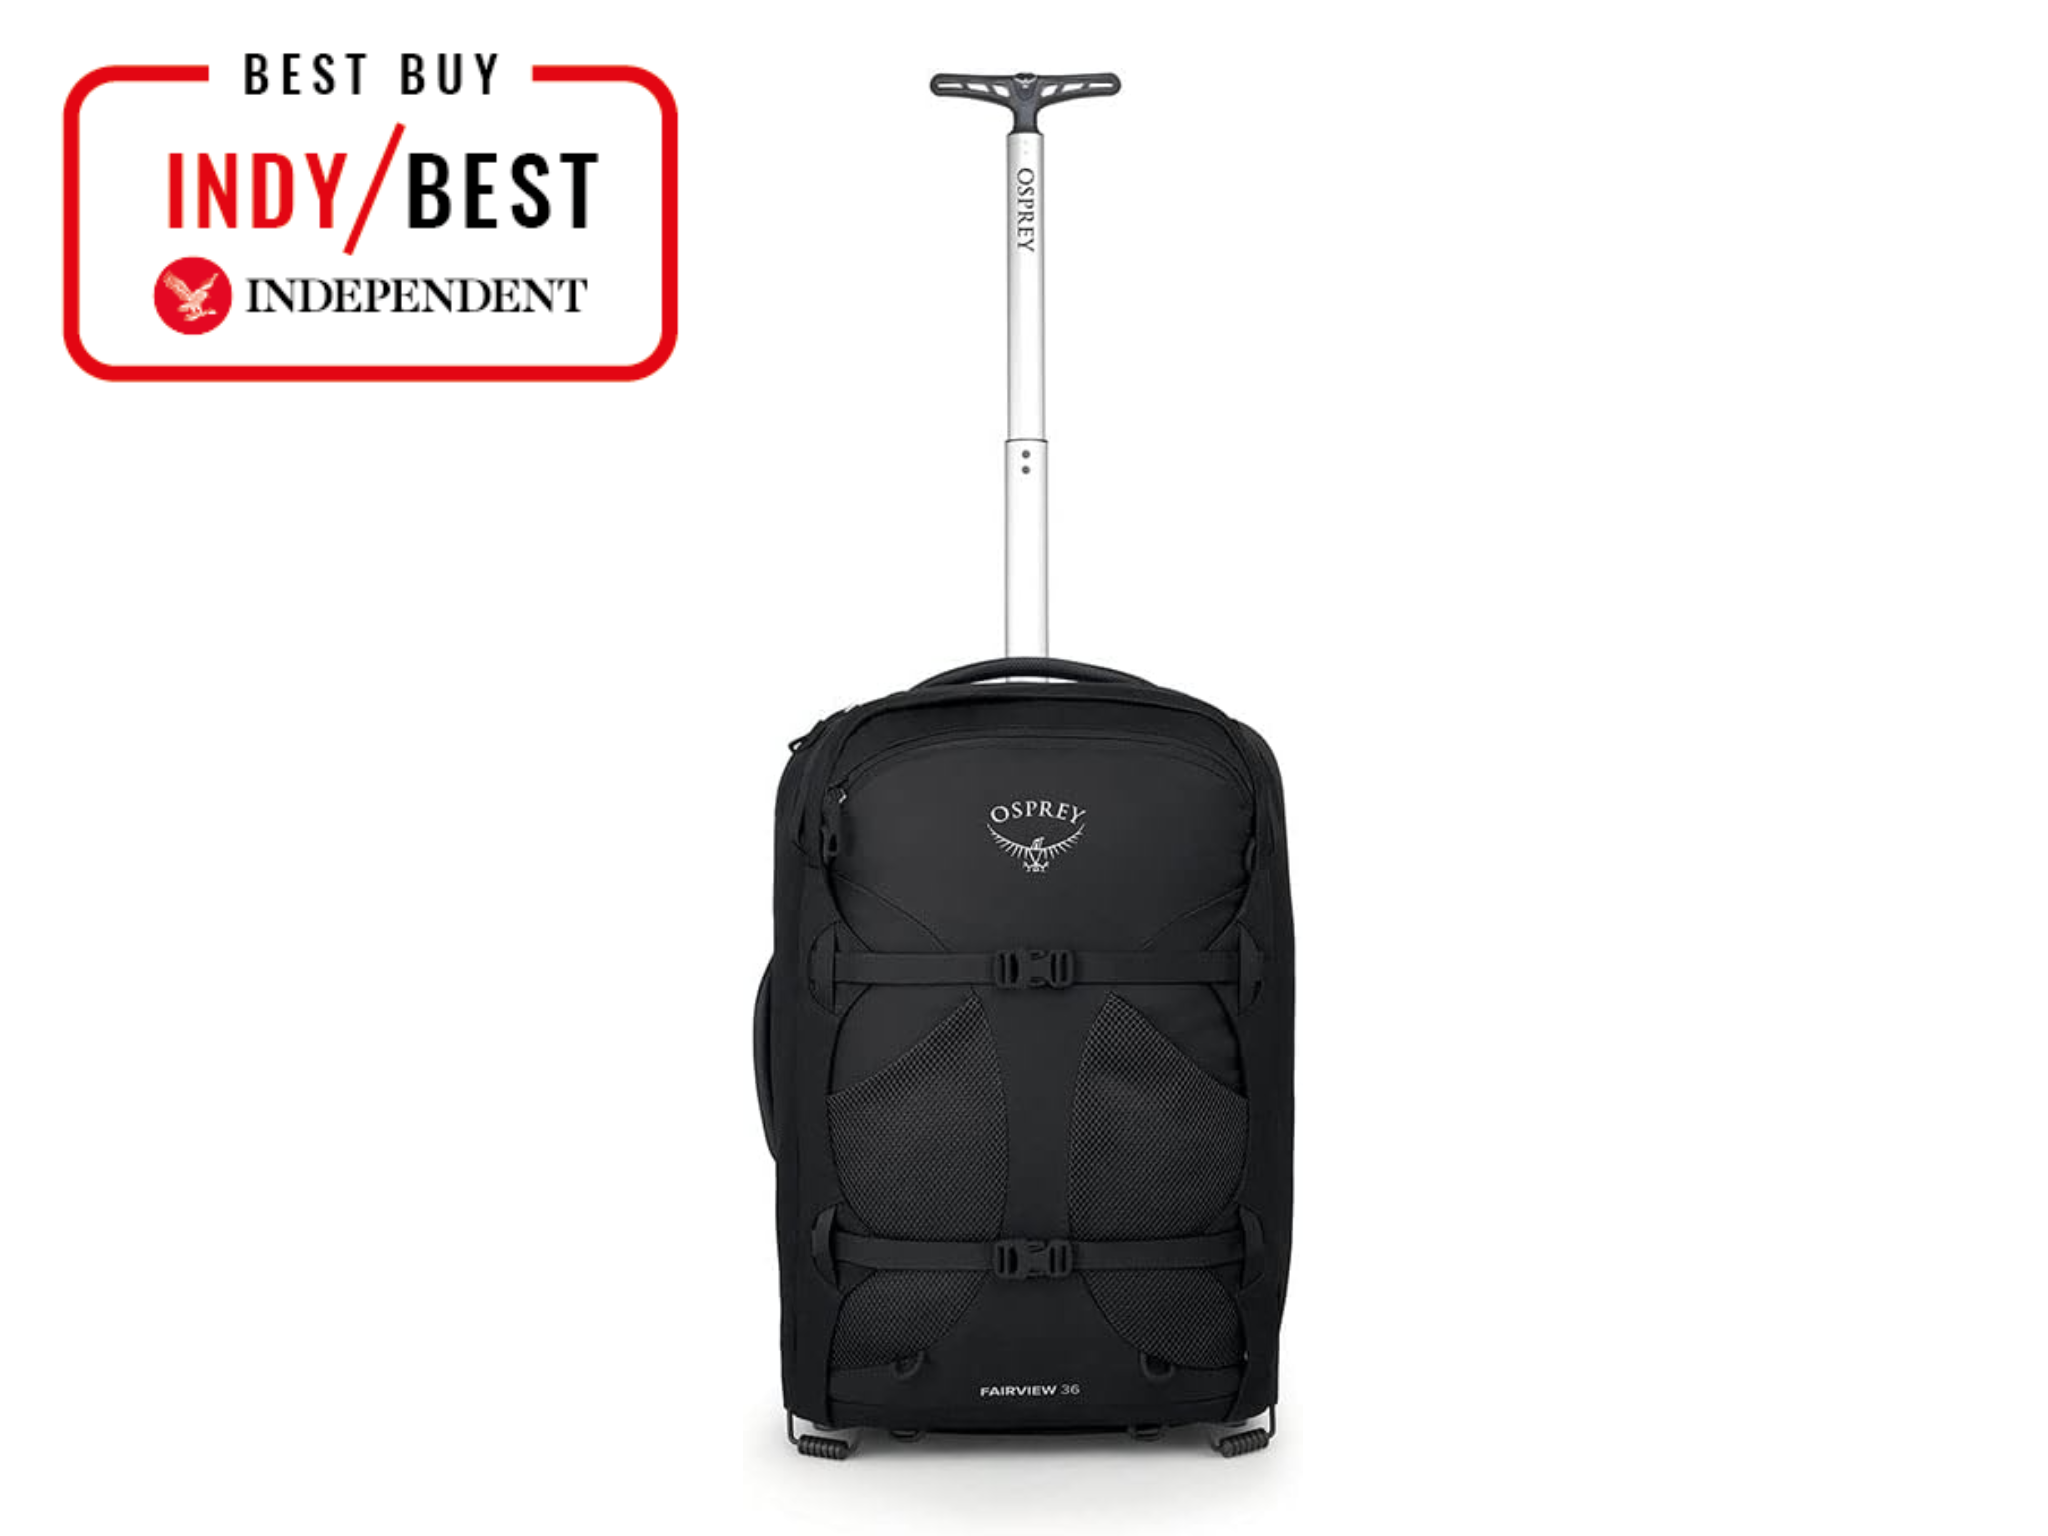 osprey-wheeled-backpack-indybest-review (1).png